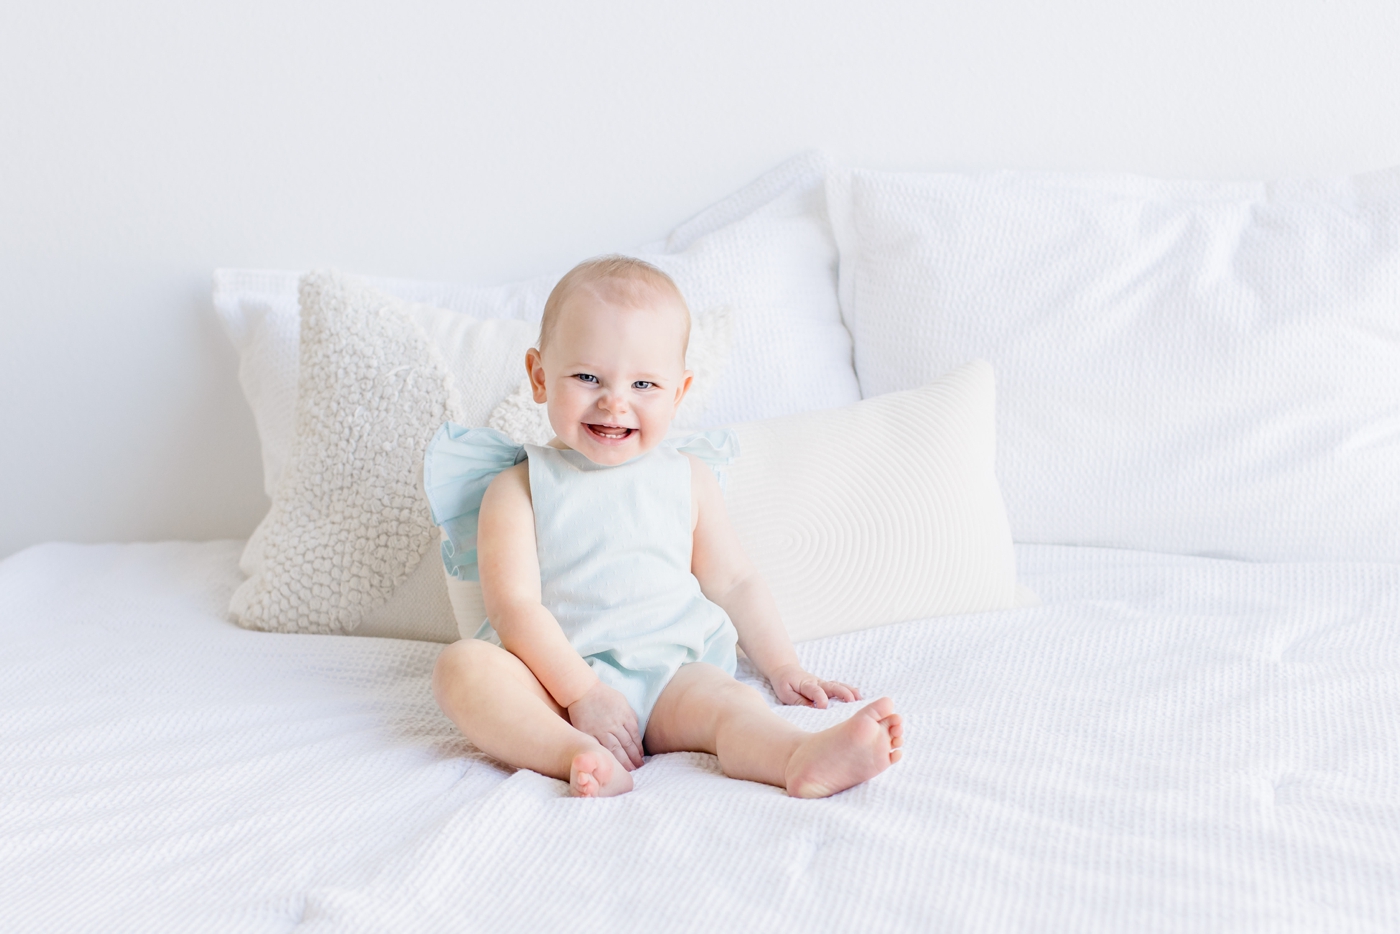 Toddler with big smile sitting on bed during studio session. Photo by Sana Ahmed Photography.